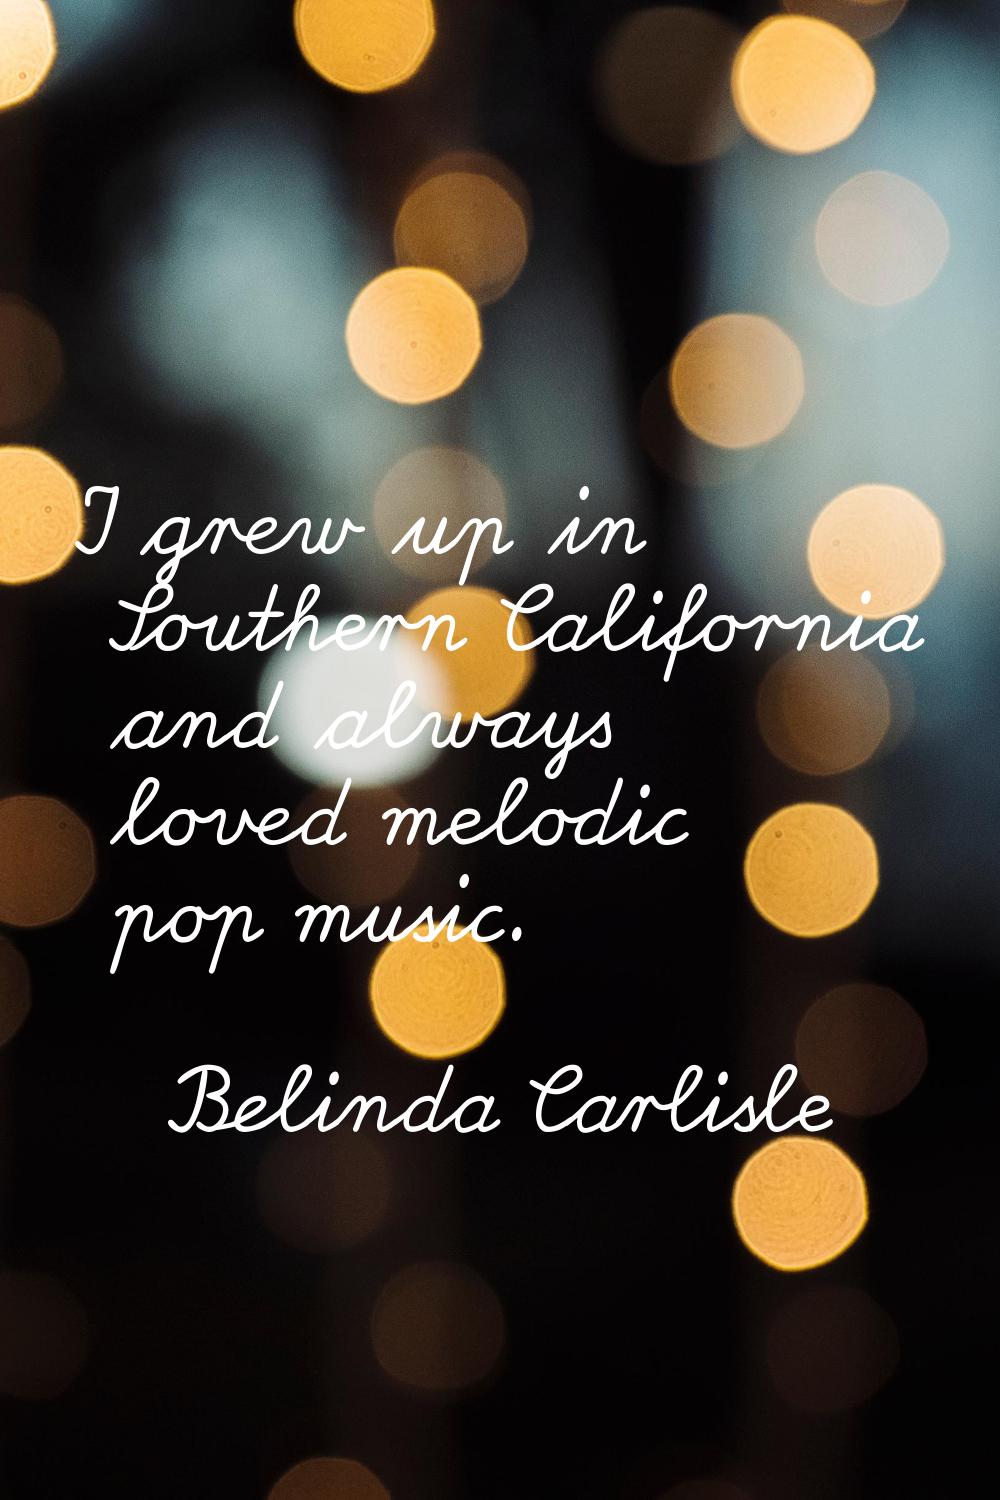 I grew up in Southern California and always loved melodic pop music.